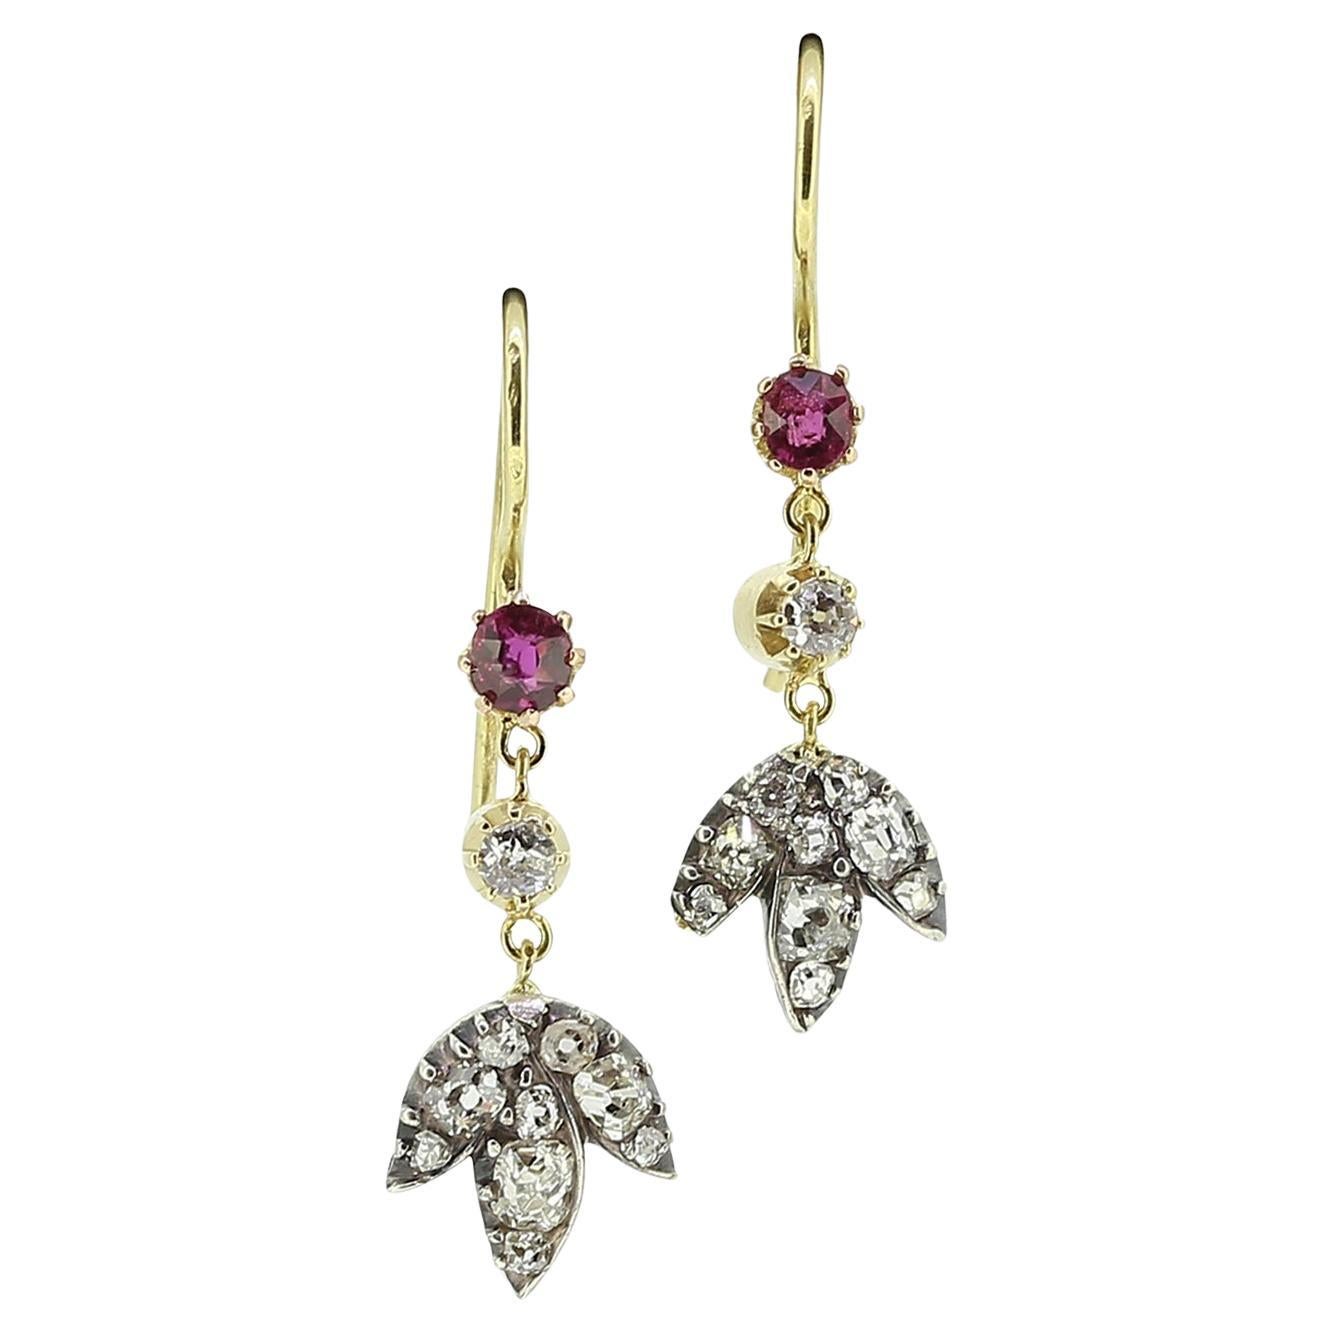 Victorian Ruby and Diamond Drop Earrings